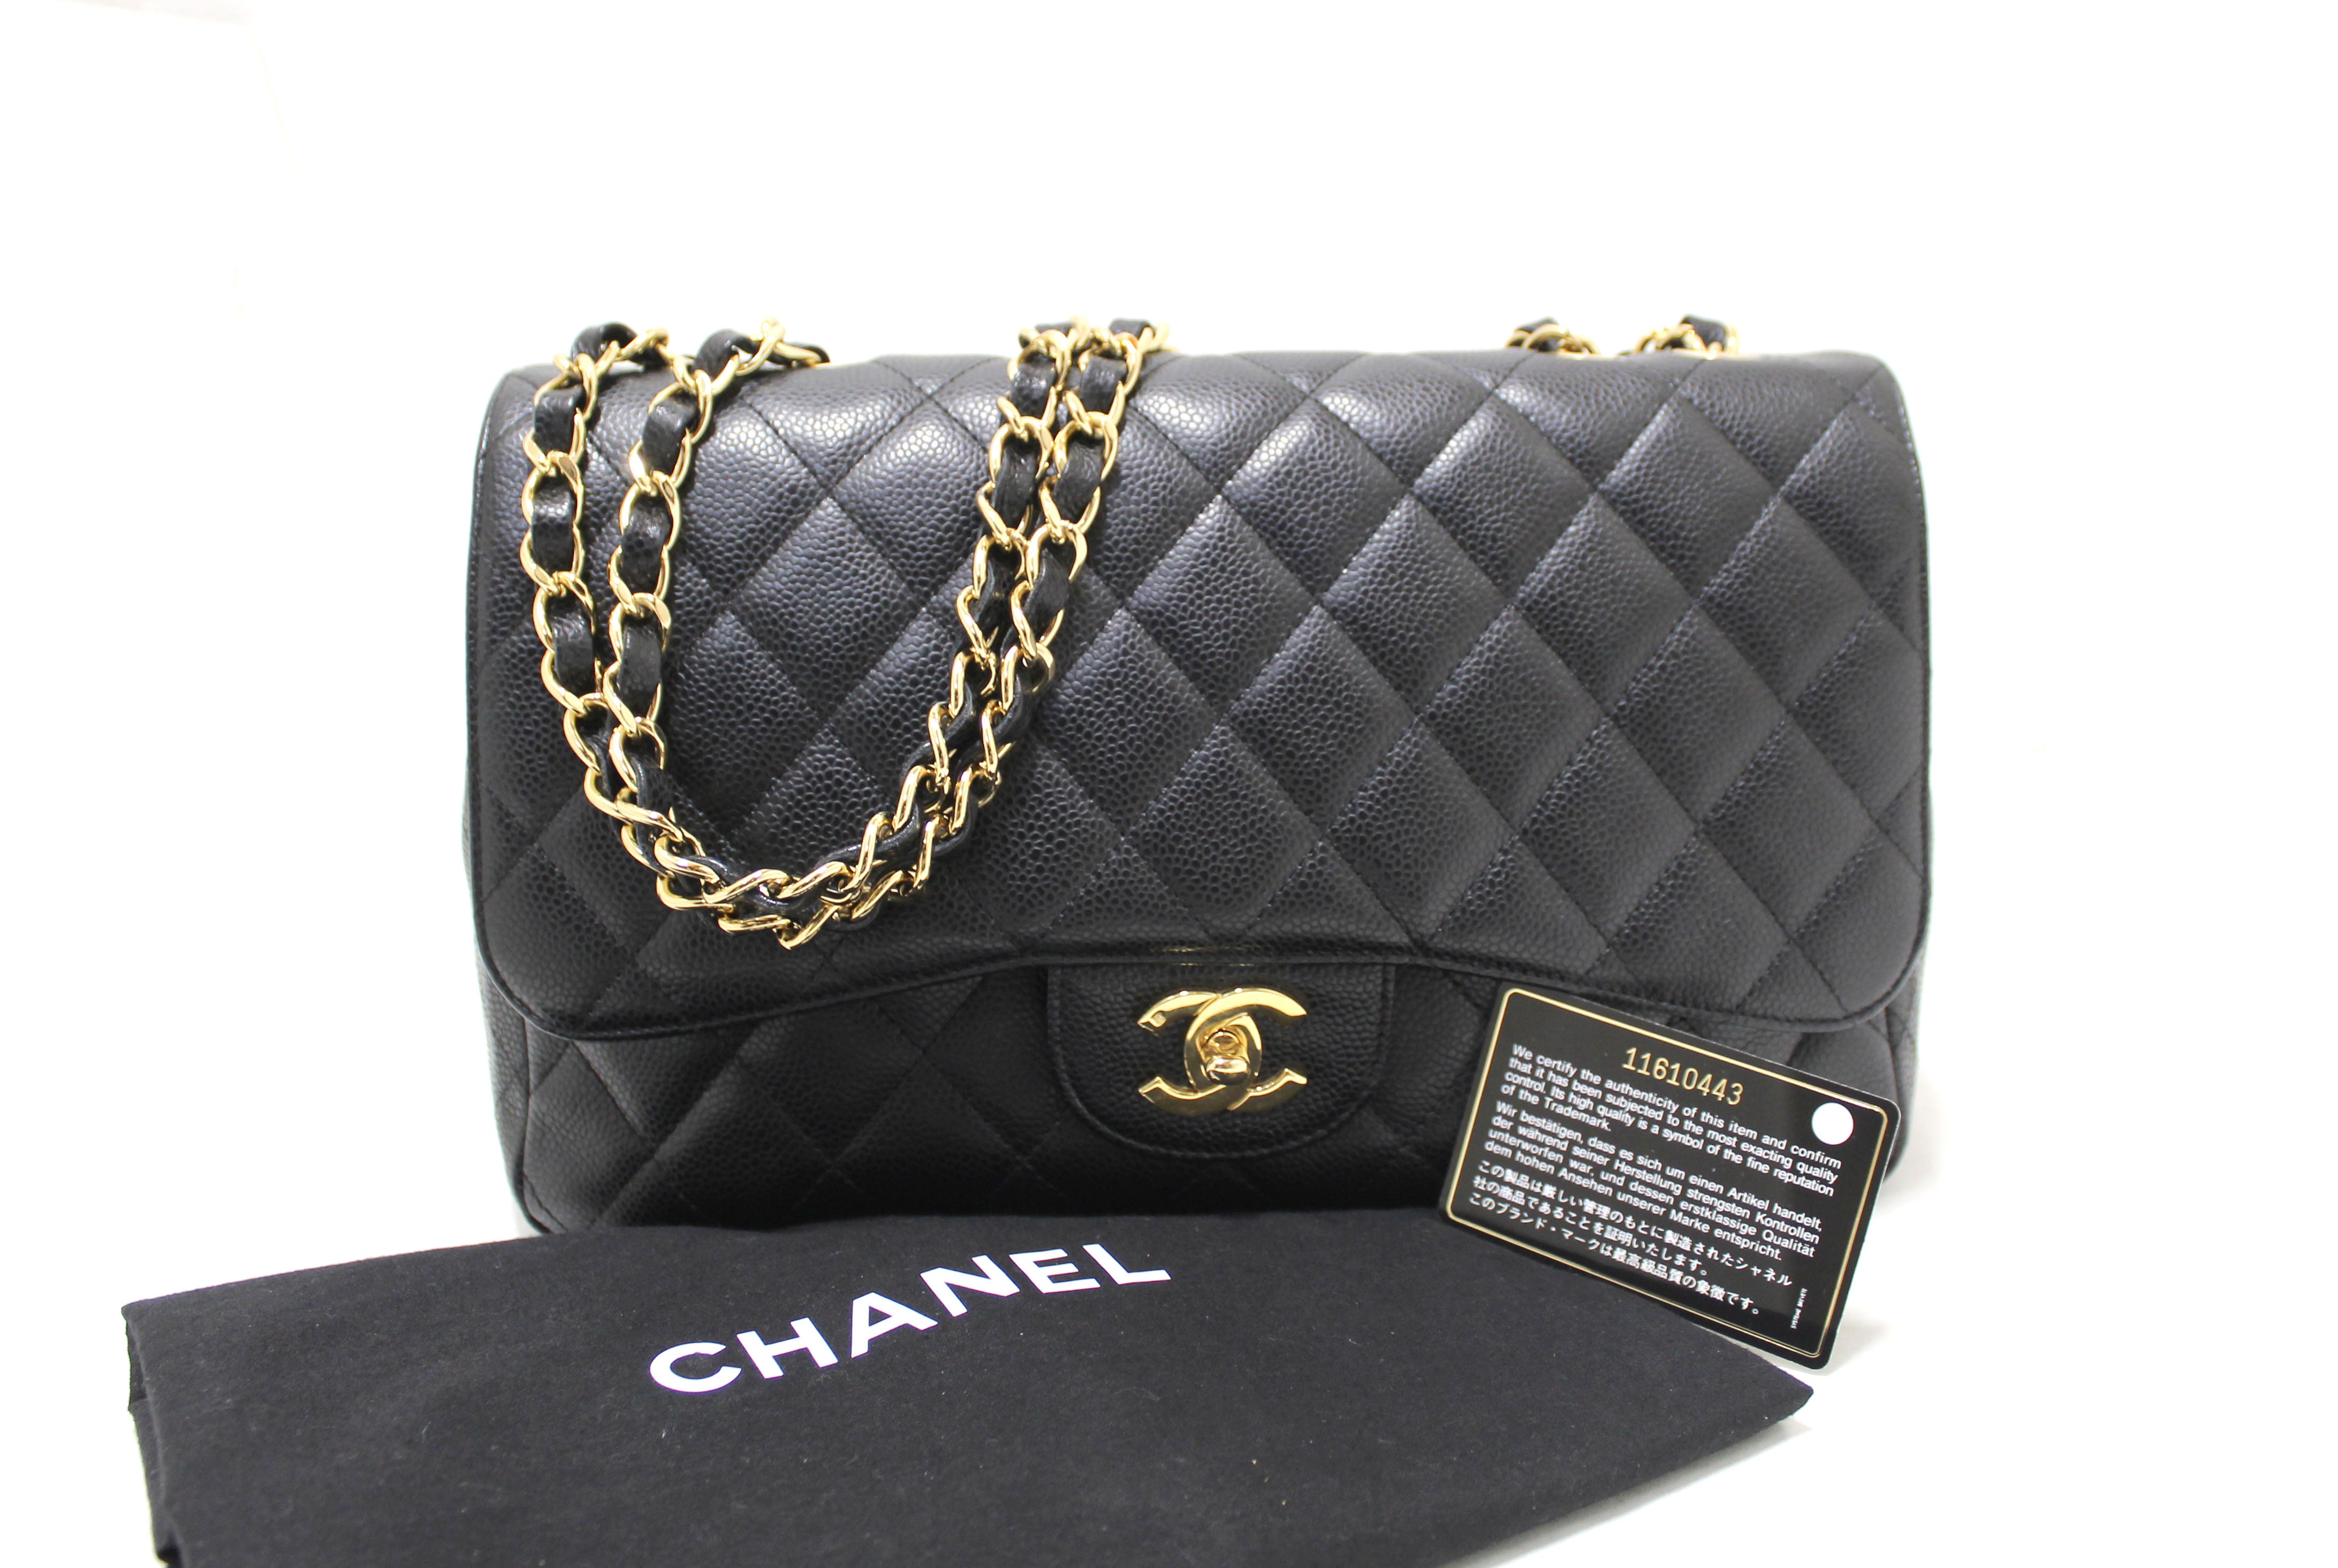 Authentic Chanel Black Quilted Caviar Leather Classic Jumbo Single